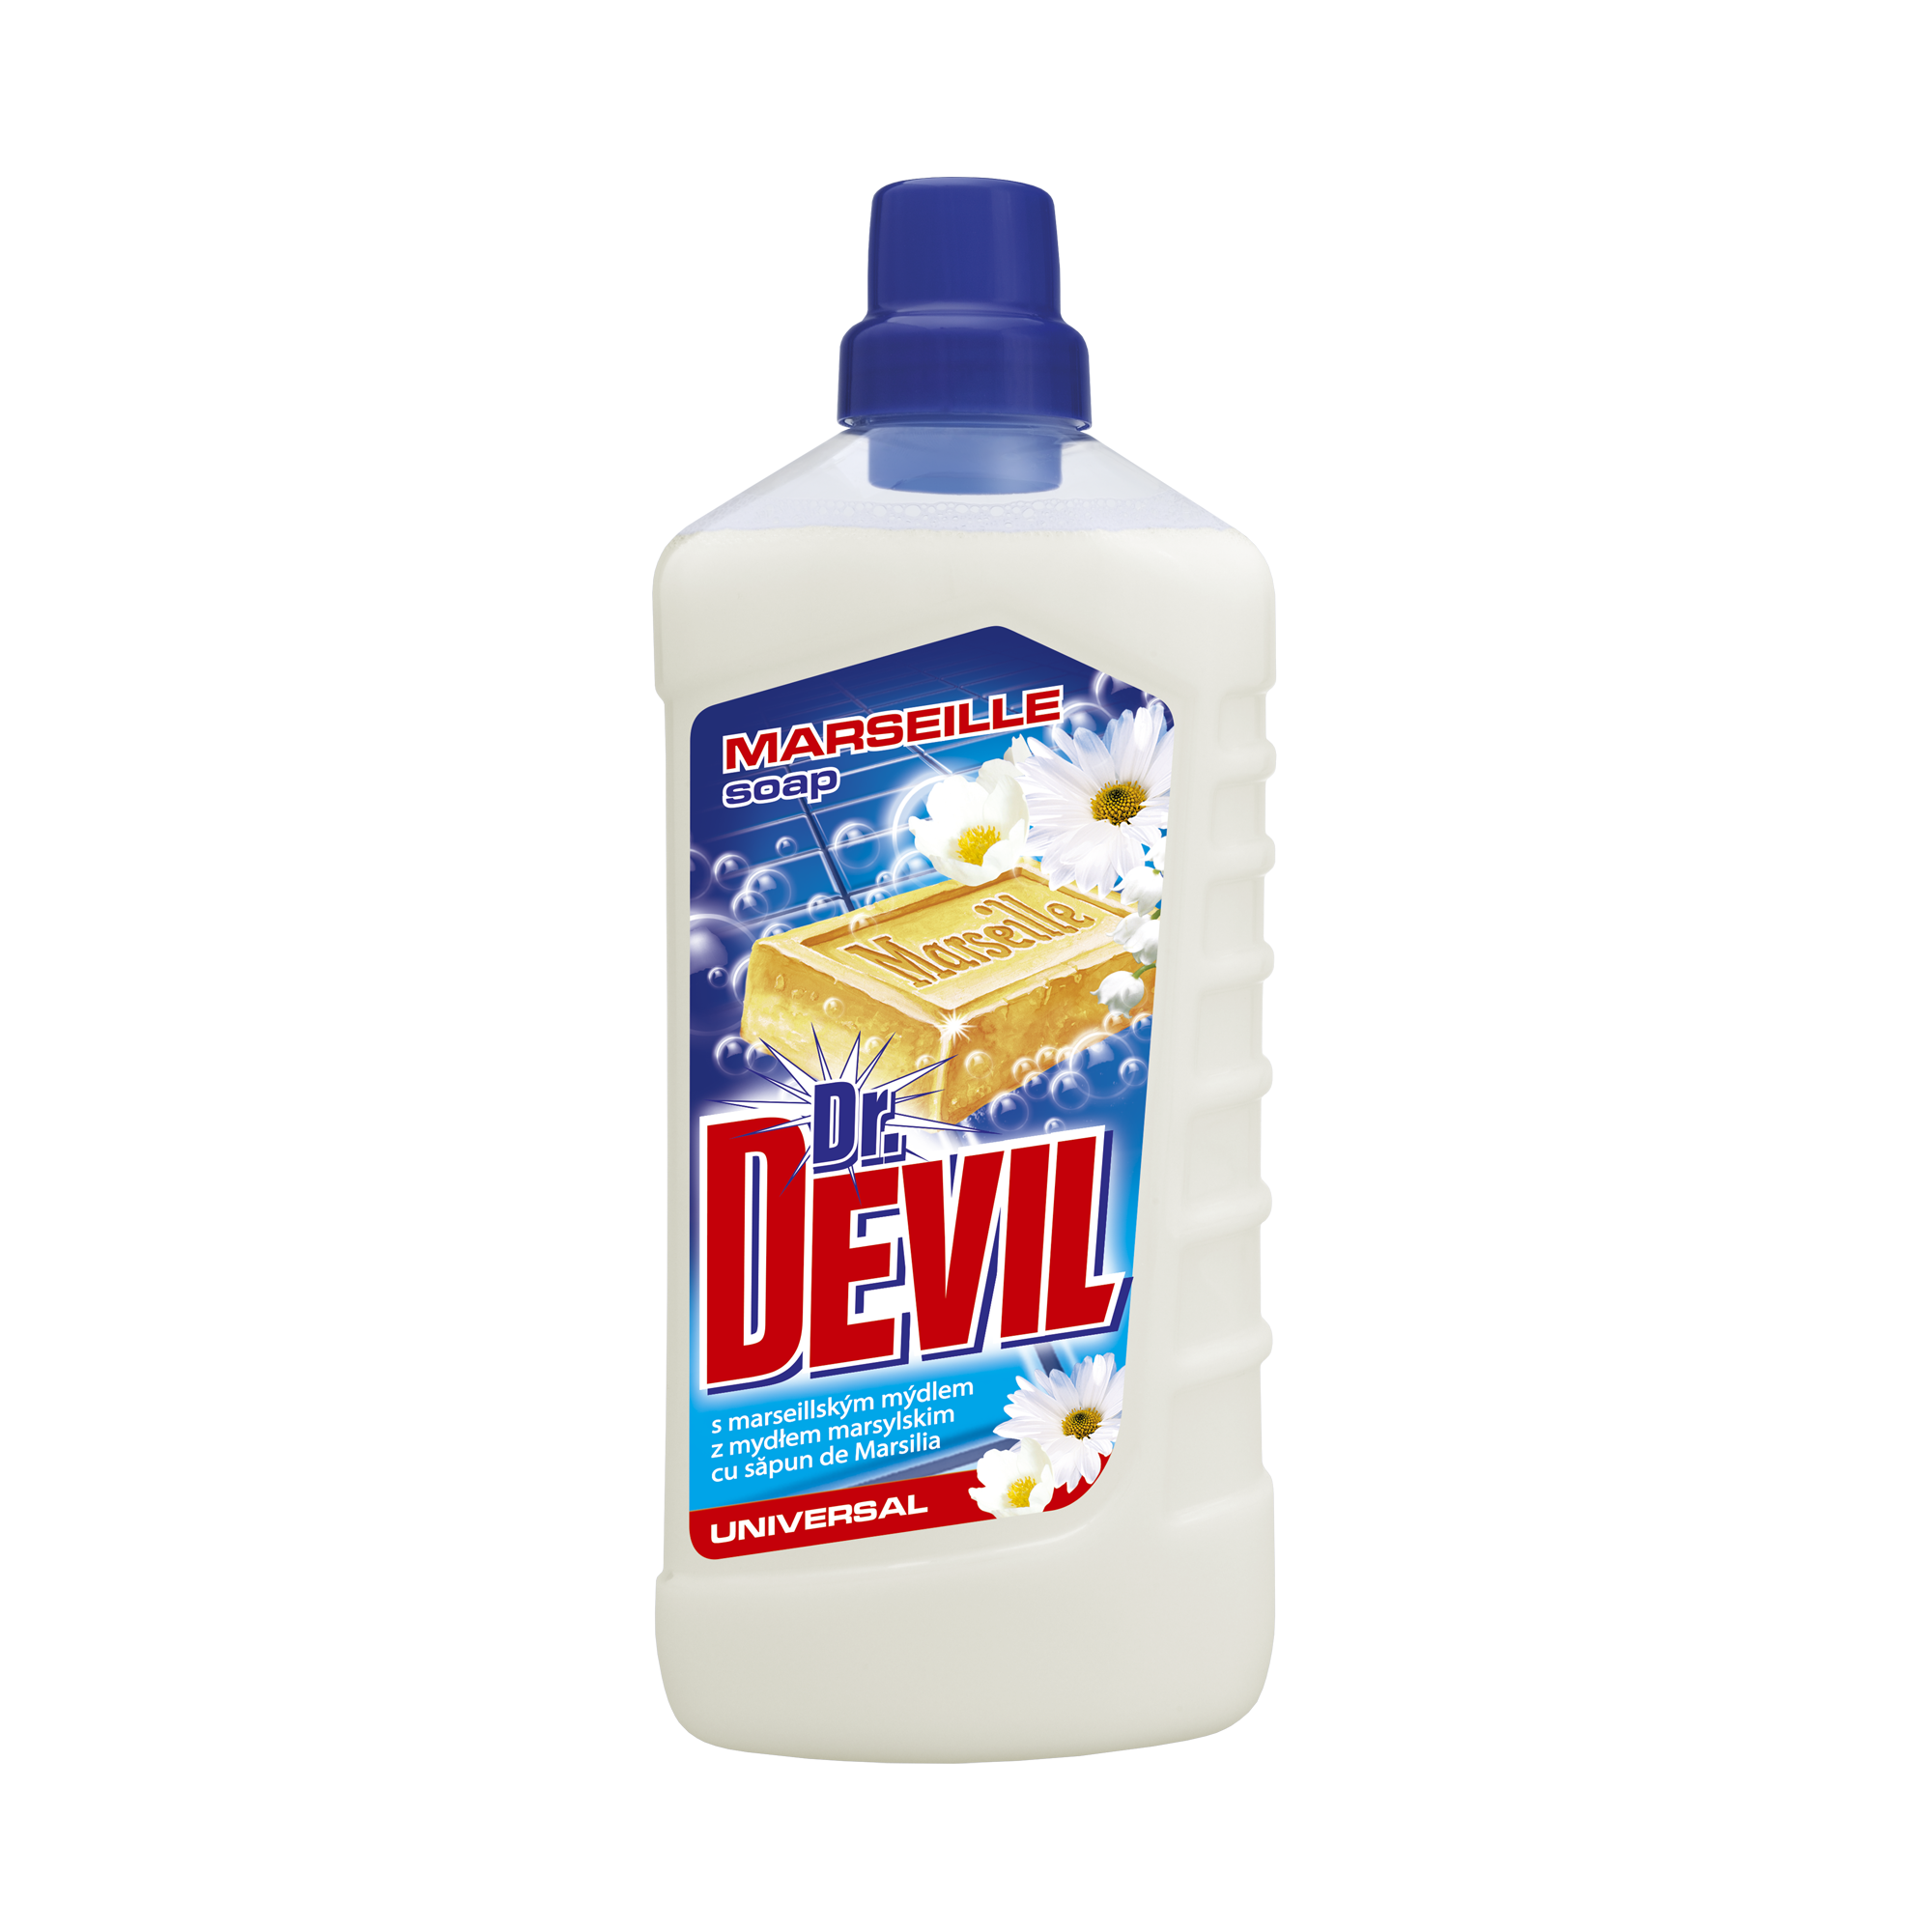 Dr. Devil universal cleaning agent Marseille